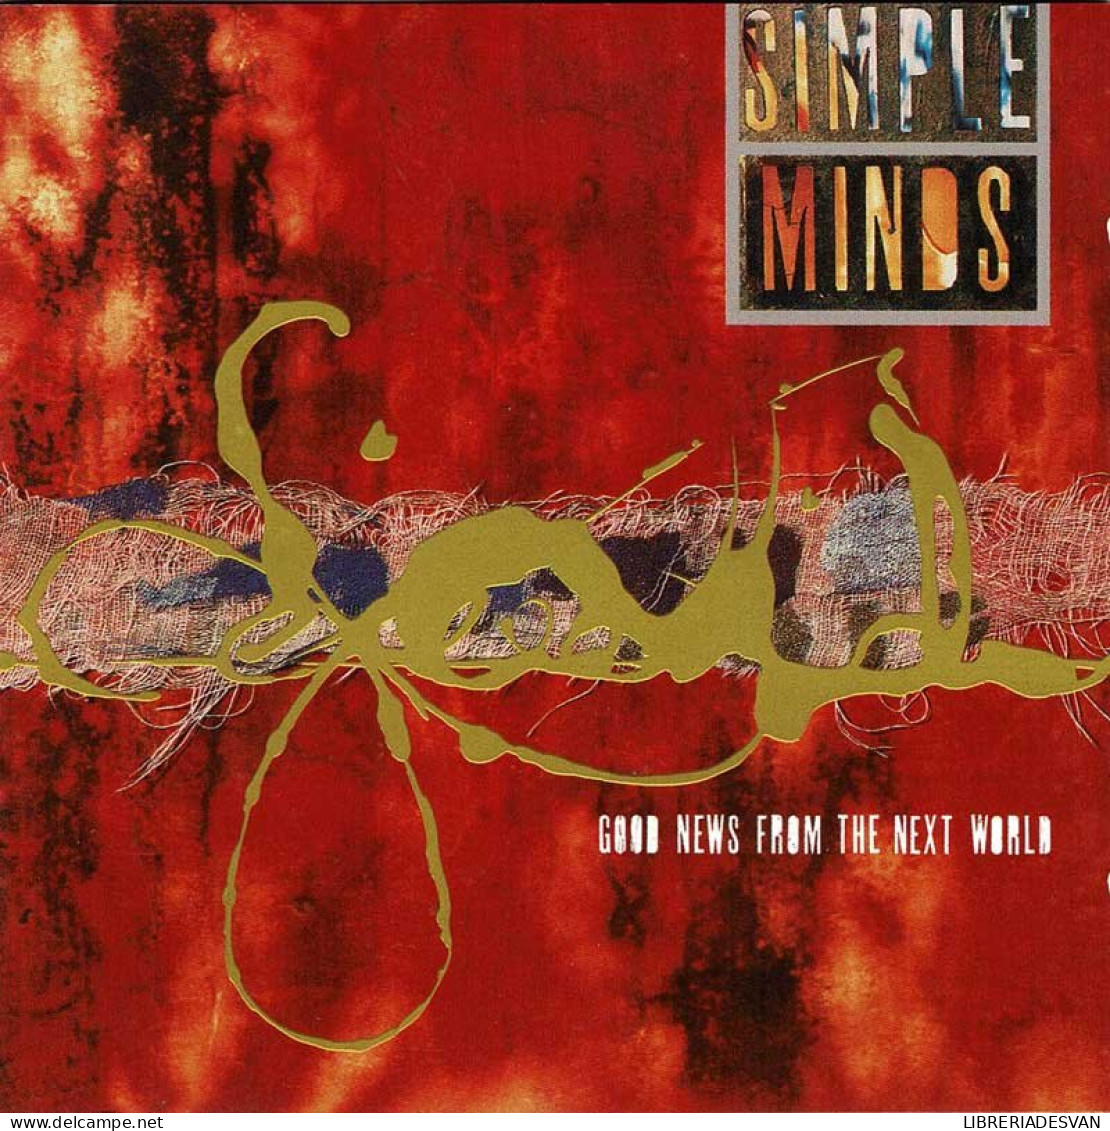 Simple Minds - Good News From The Next World. CD - Disco, Pop